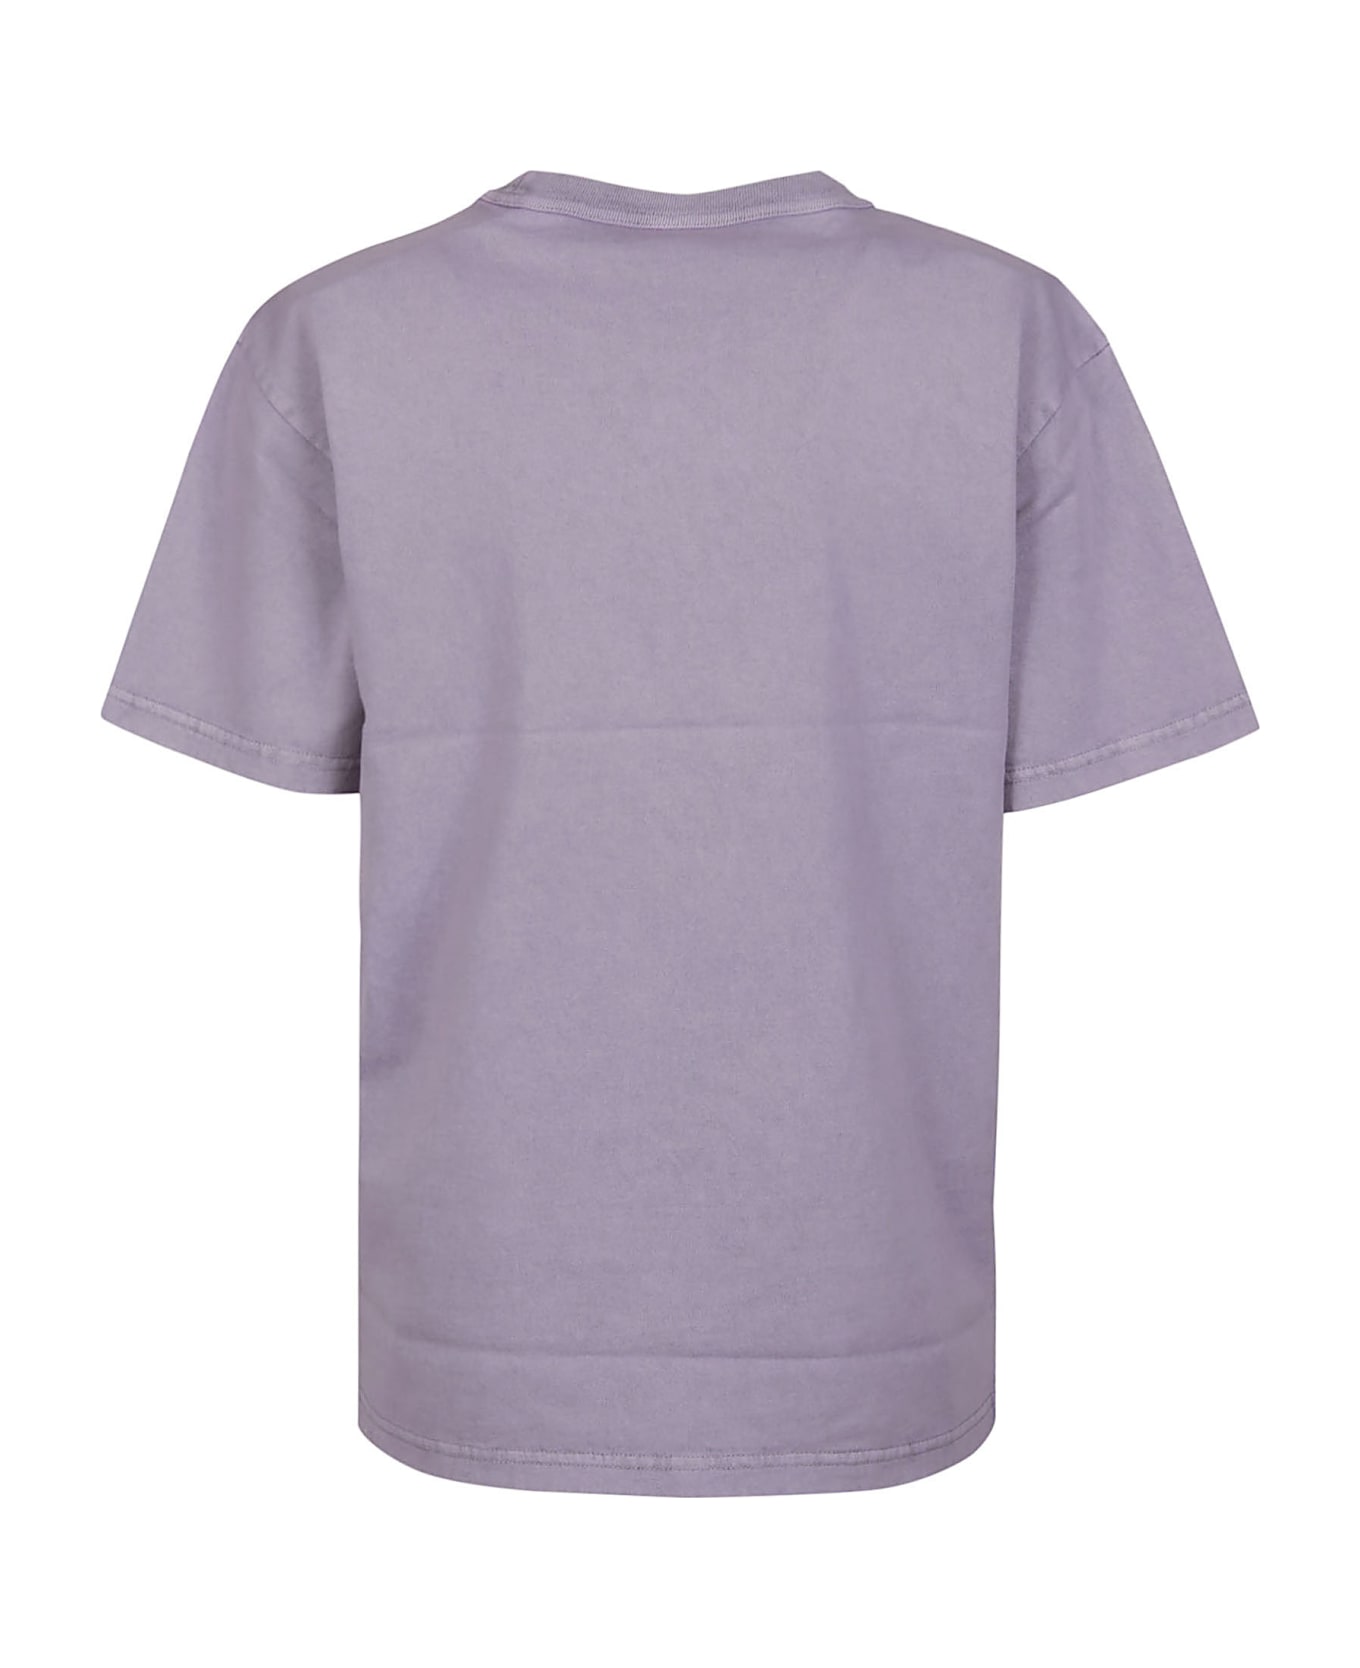 T by Alexander Wang Puff Logo Bound Neck Essential T-shirt - A Acid Pink Lavender Tシャツ